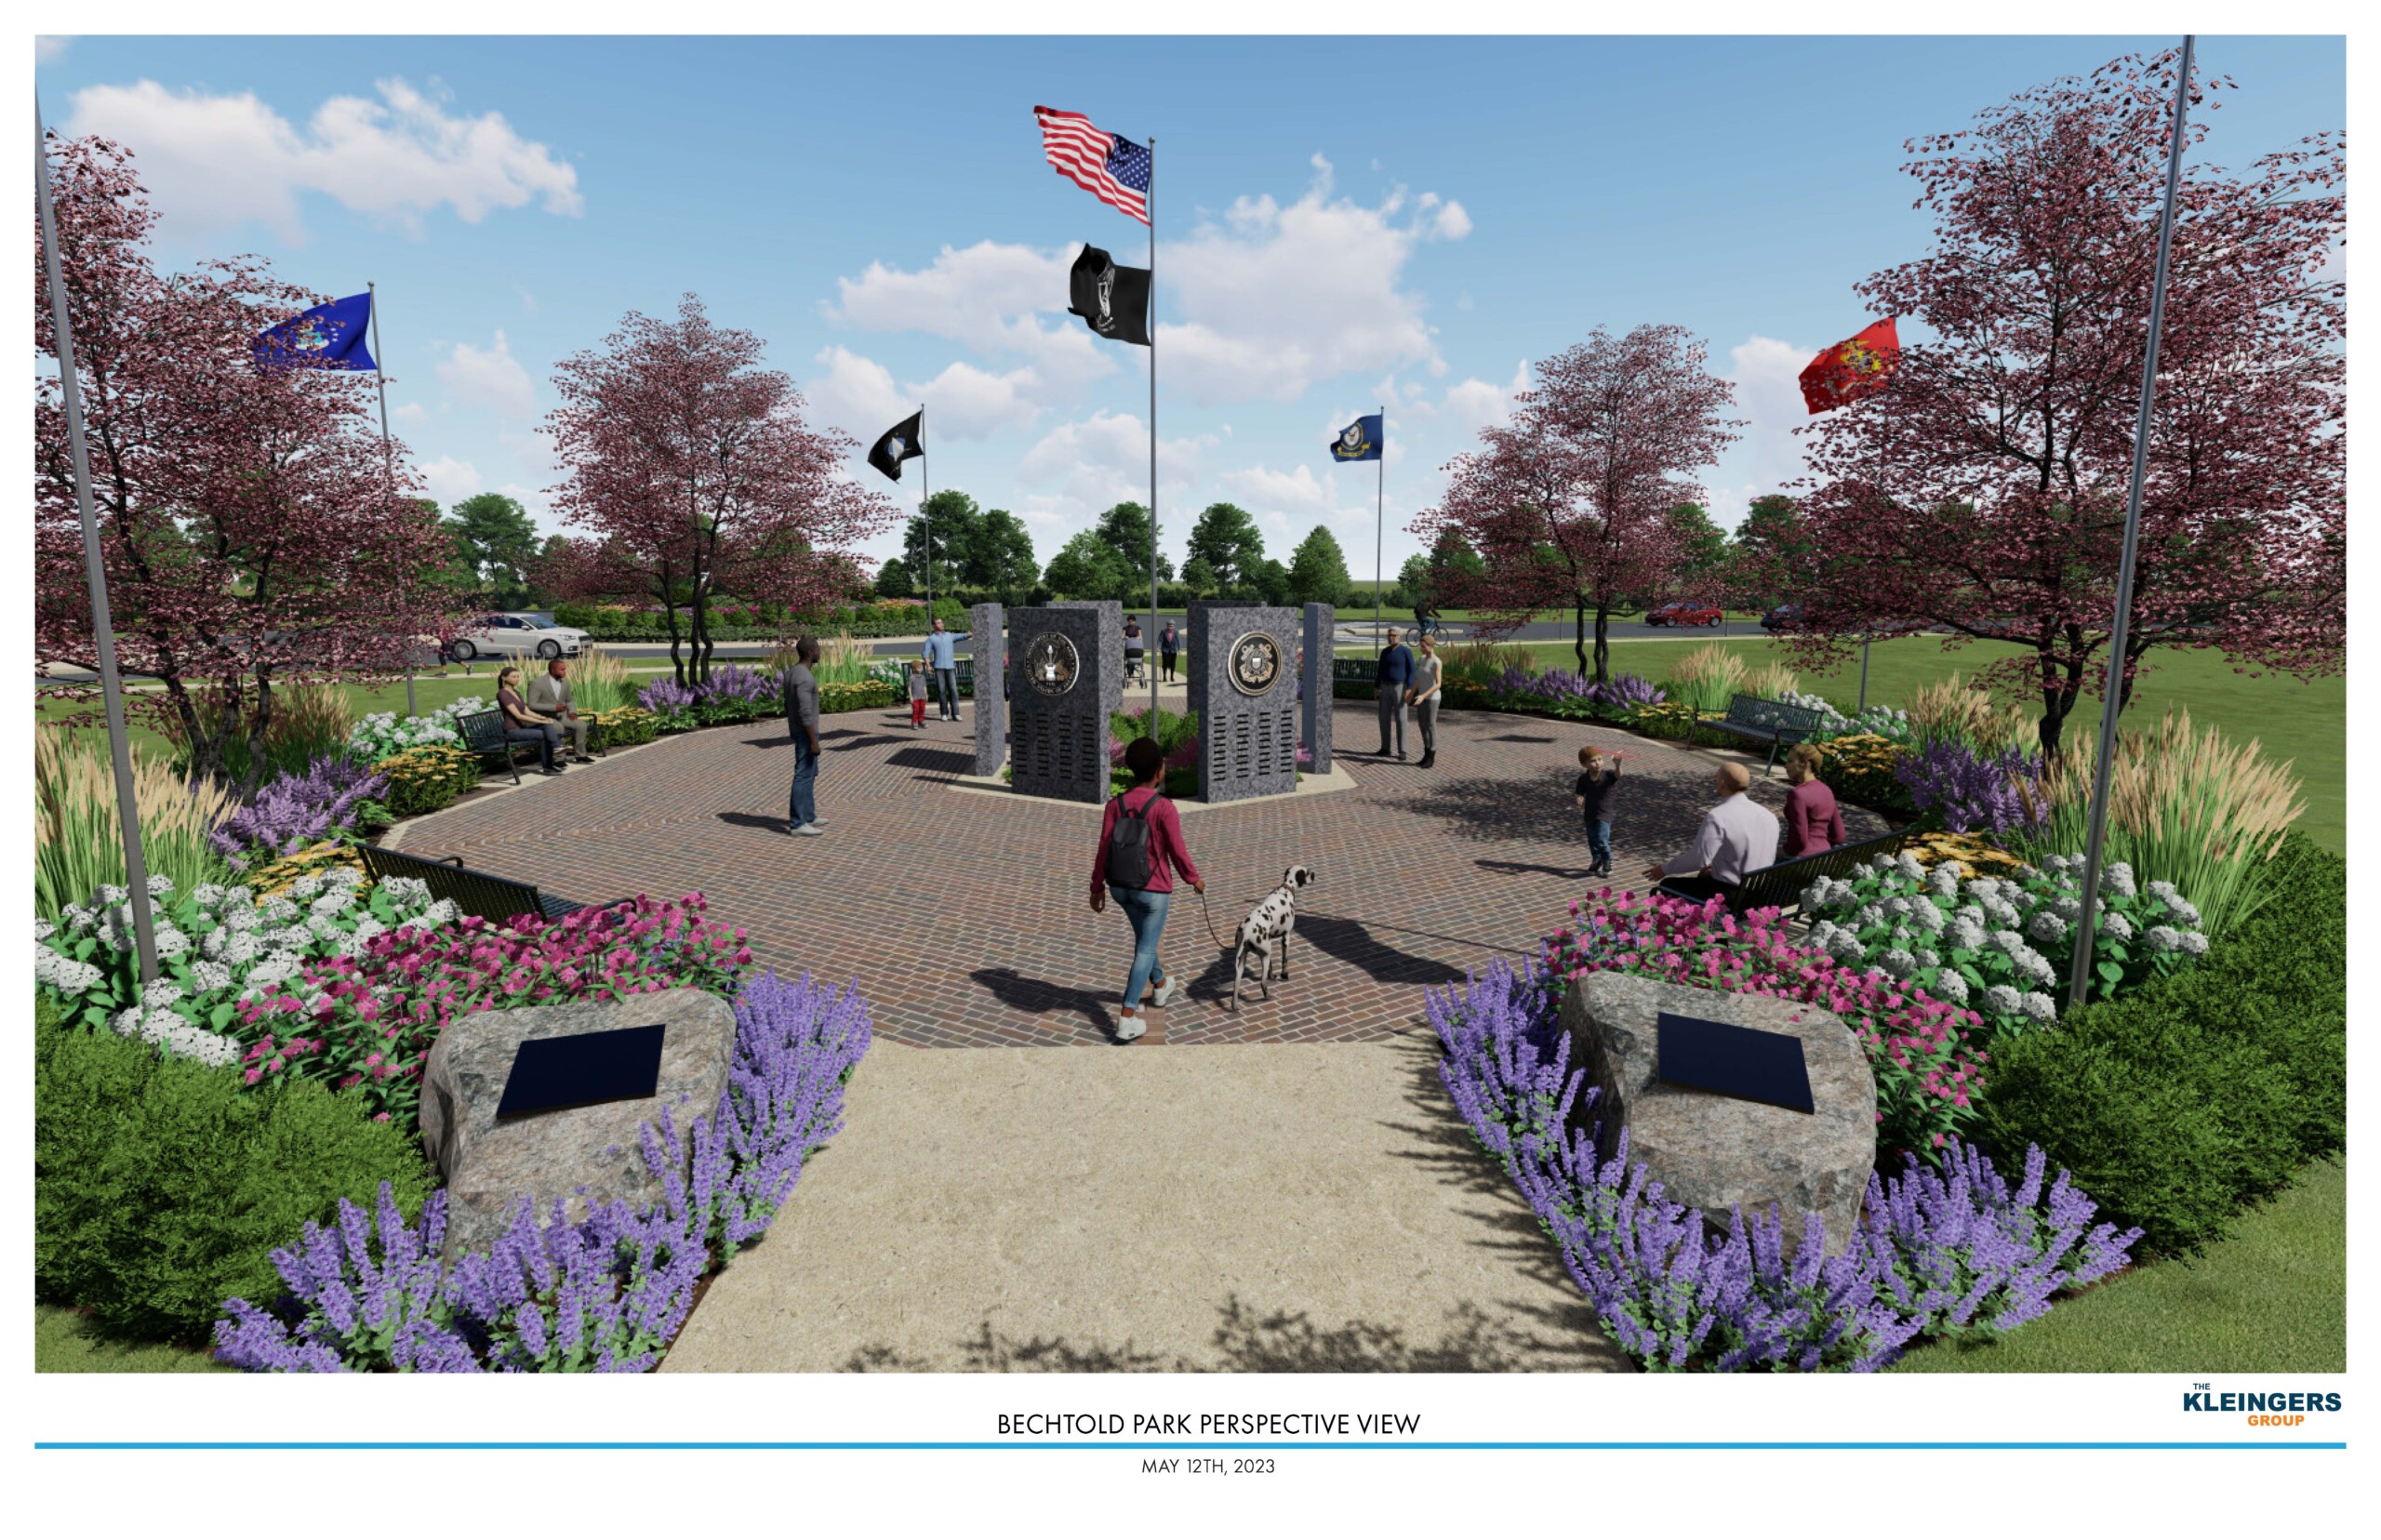 Veterans memorial rendering - flags with monuments in a circle surrounded by brick path and landscaping